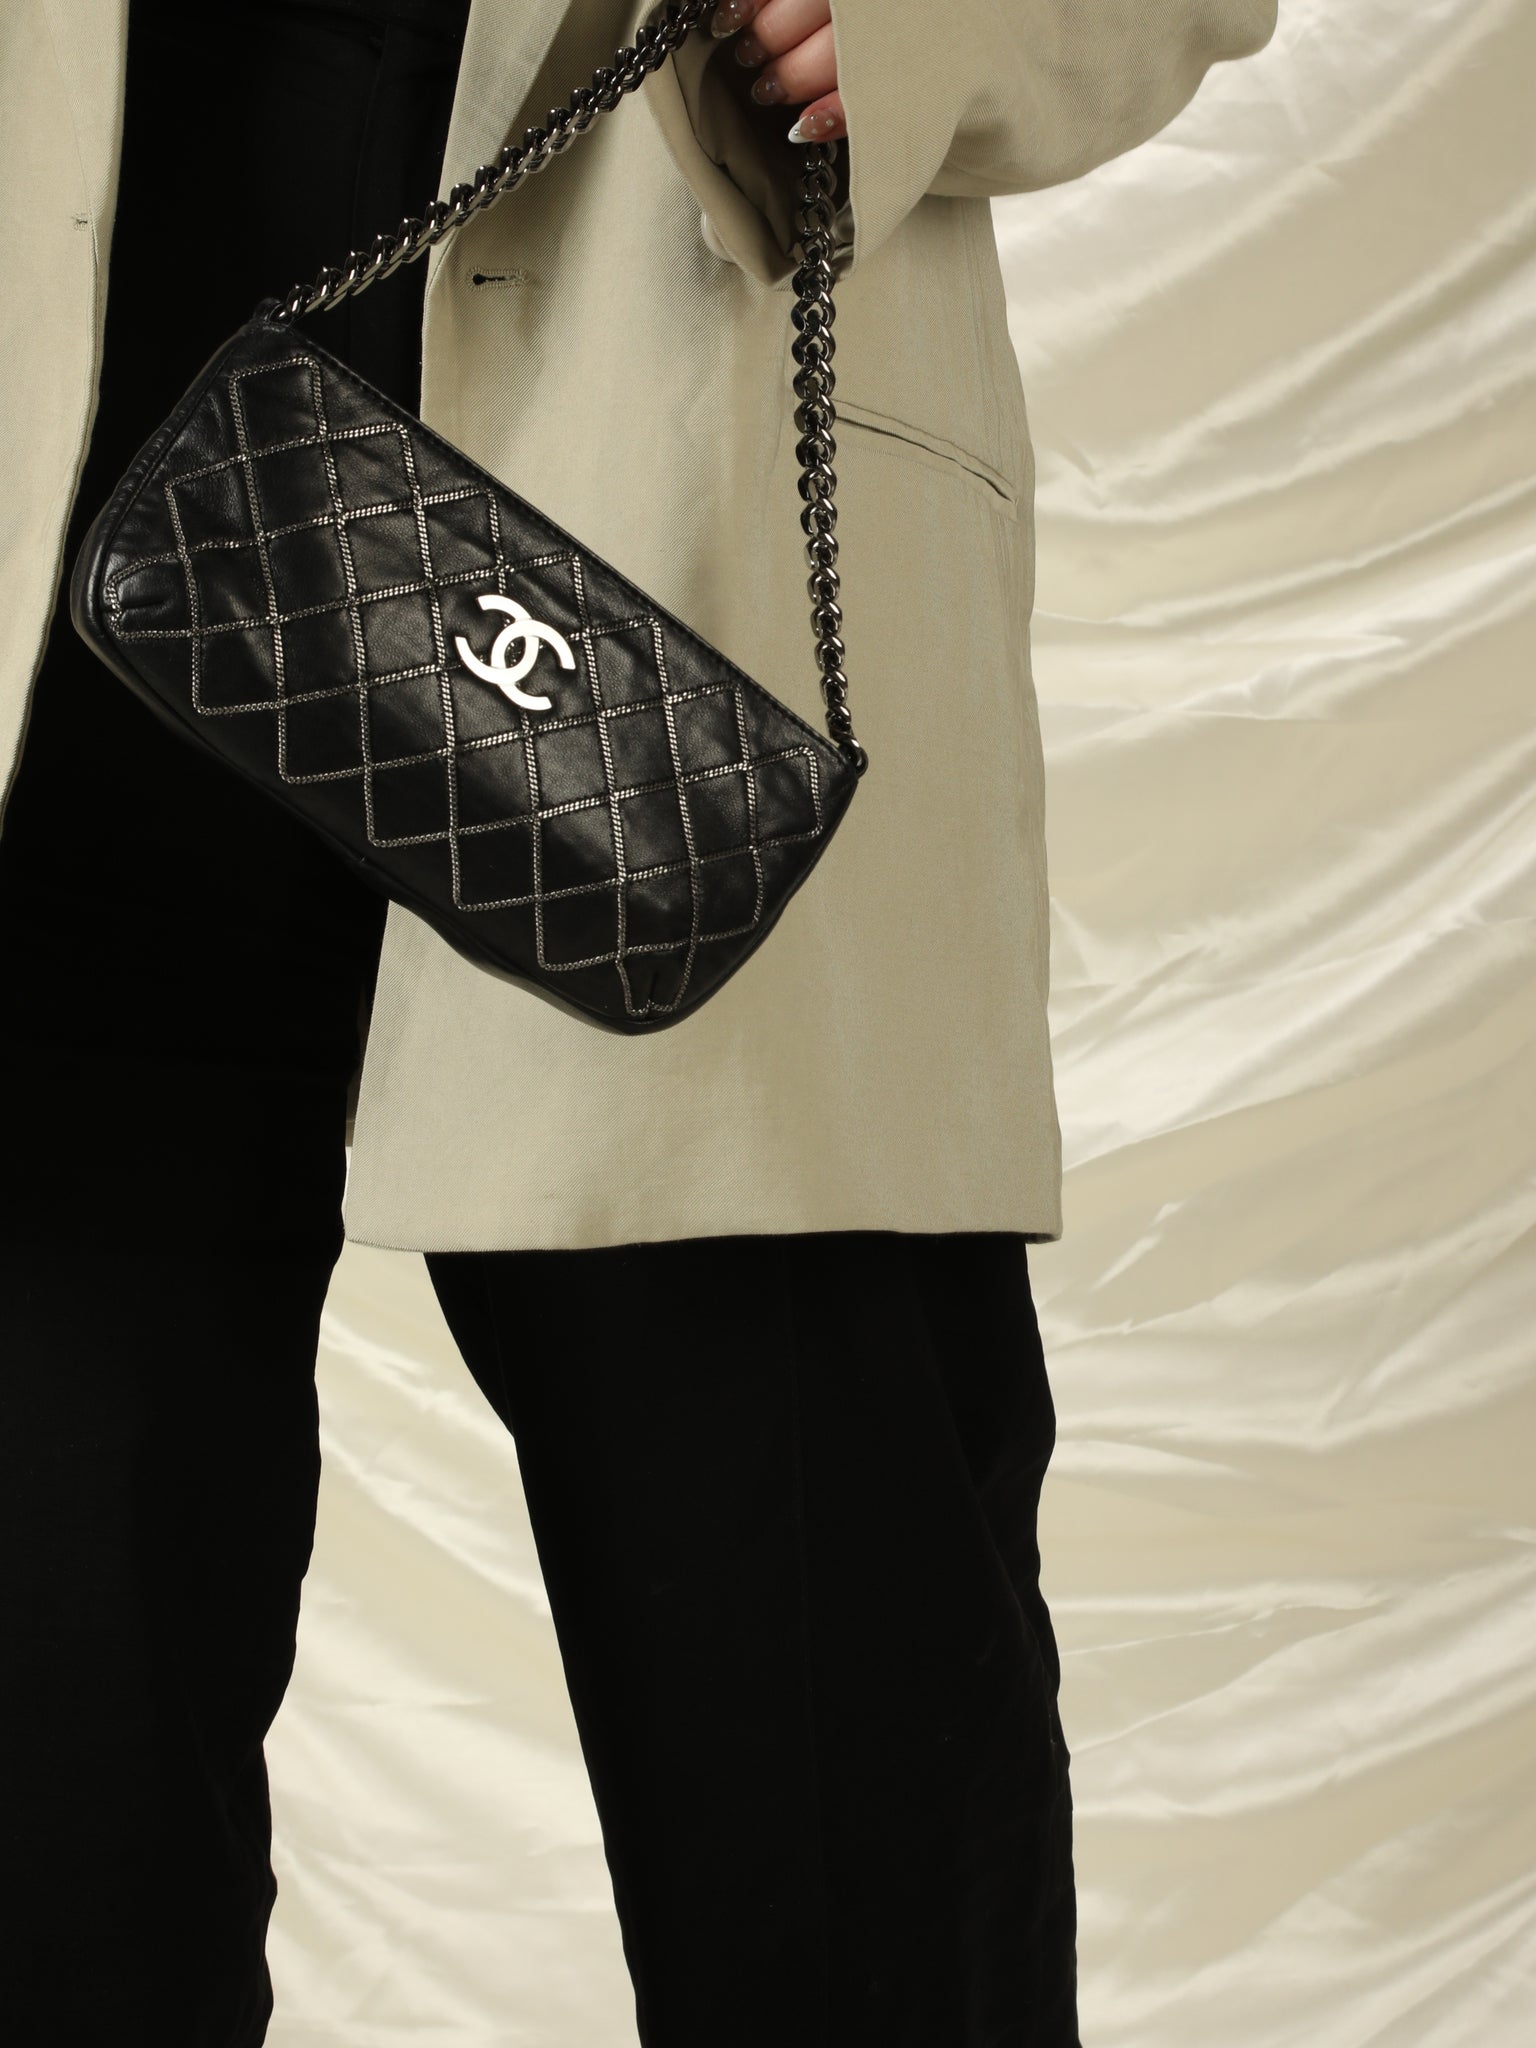 Chanel Lambskin Quilted Chain Shopper Tote – SFN